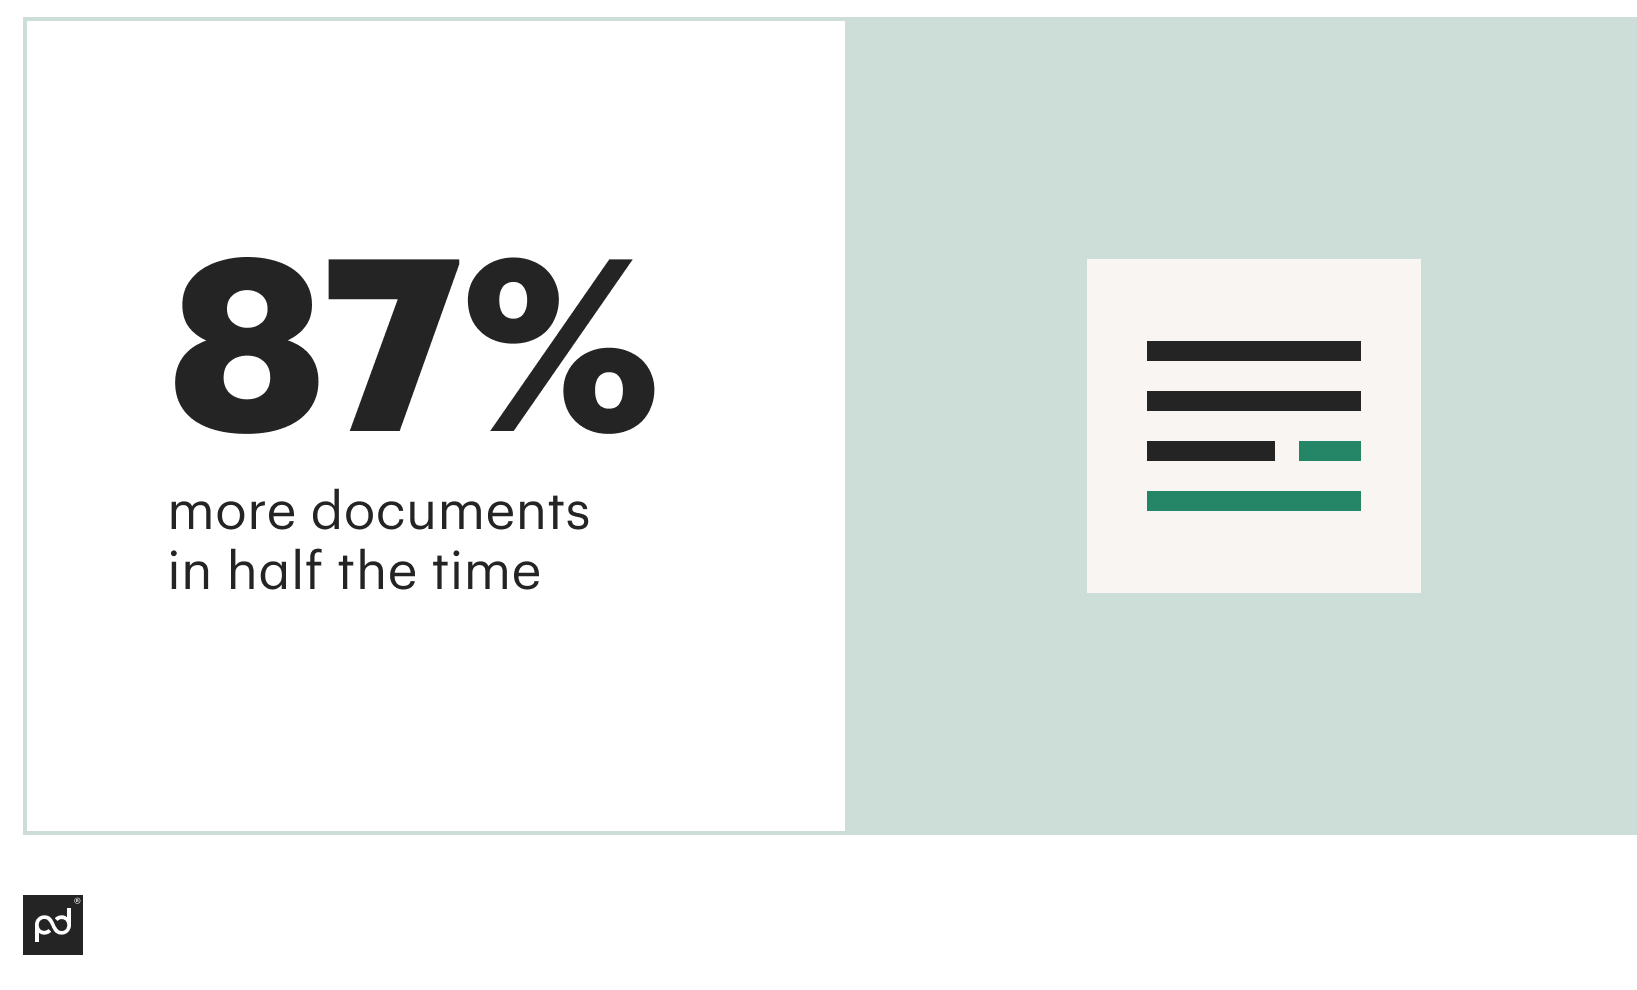 infographic shows that PandaDoc automation platform helps to complete 87% more documents in half the time